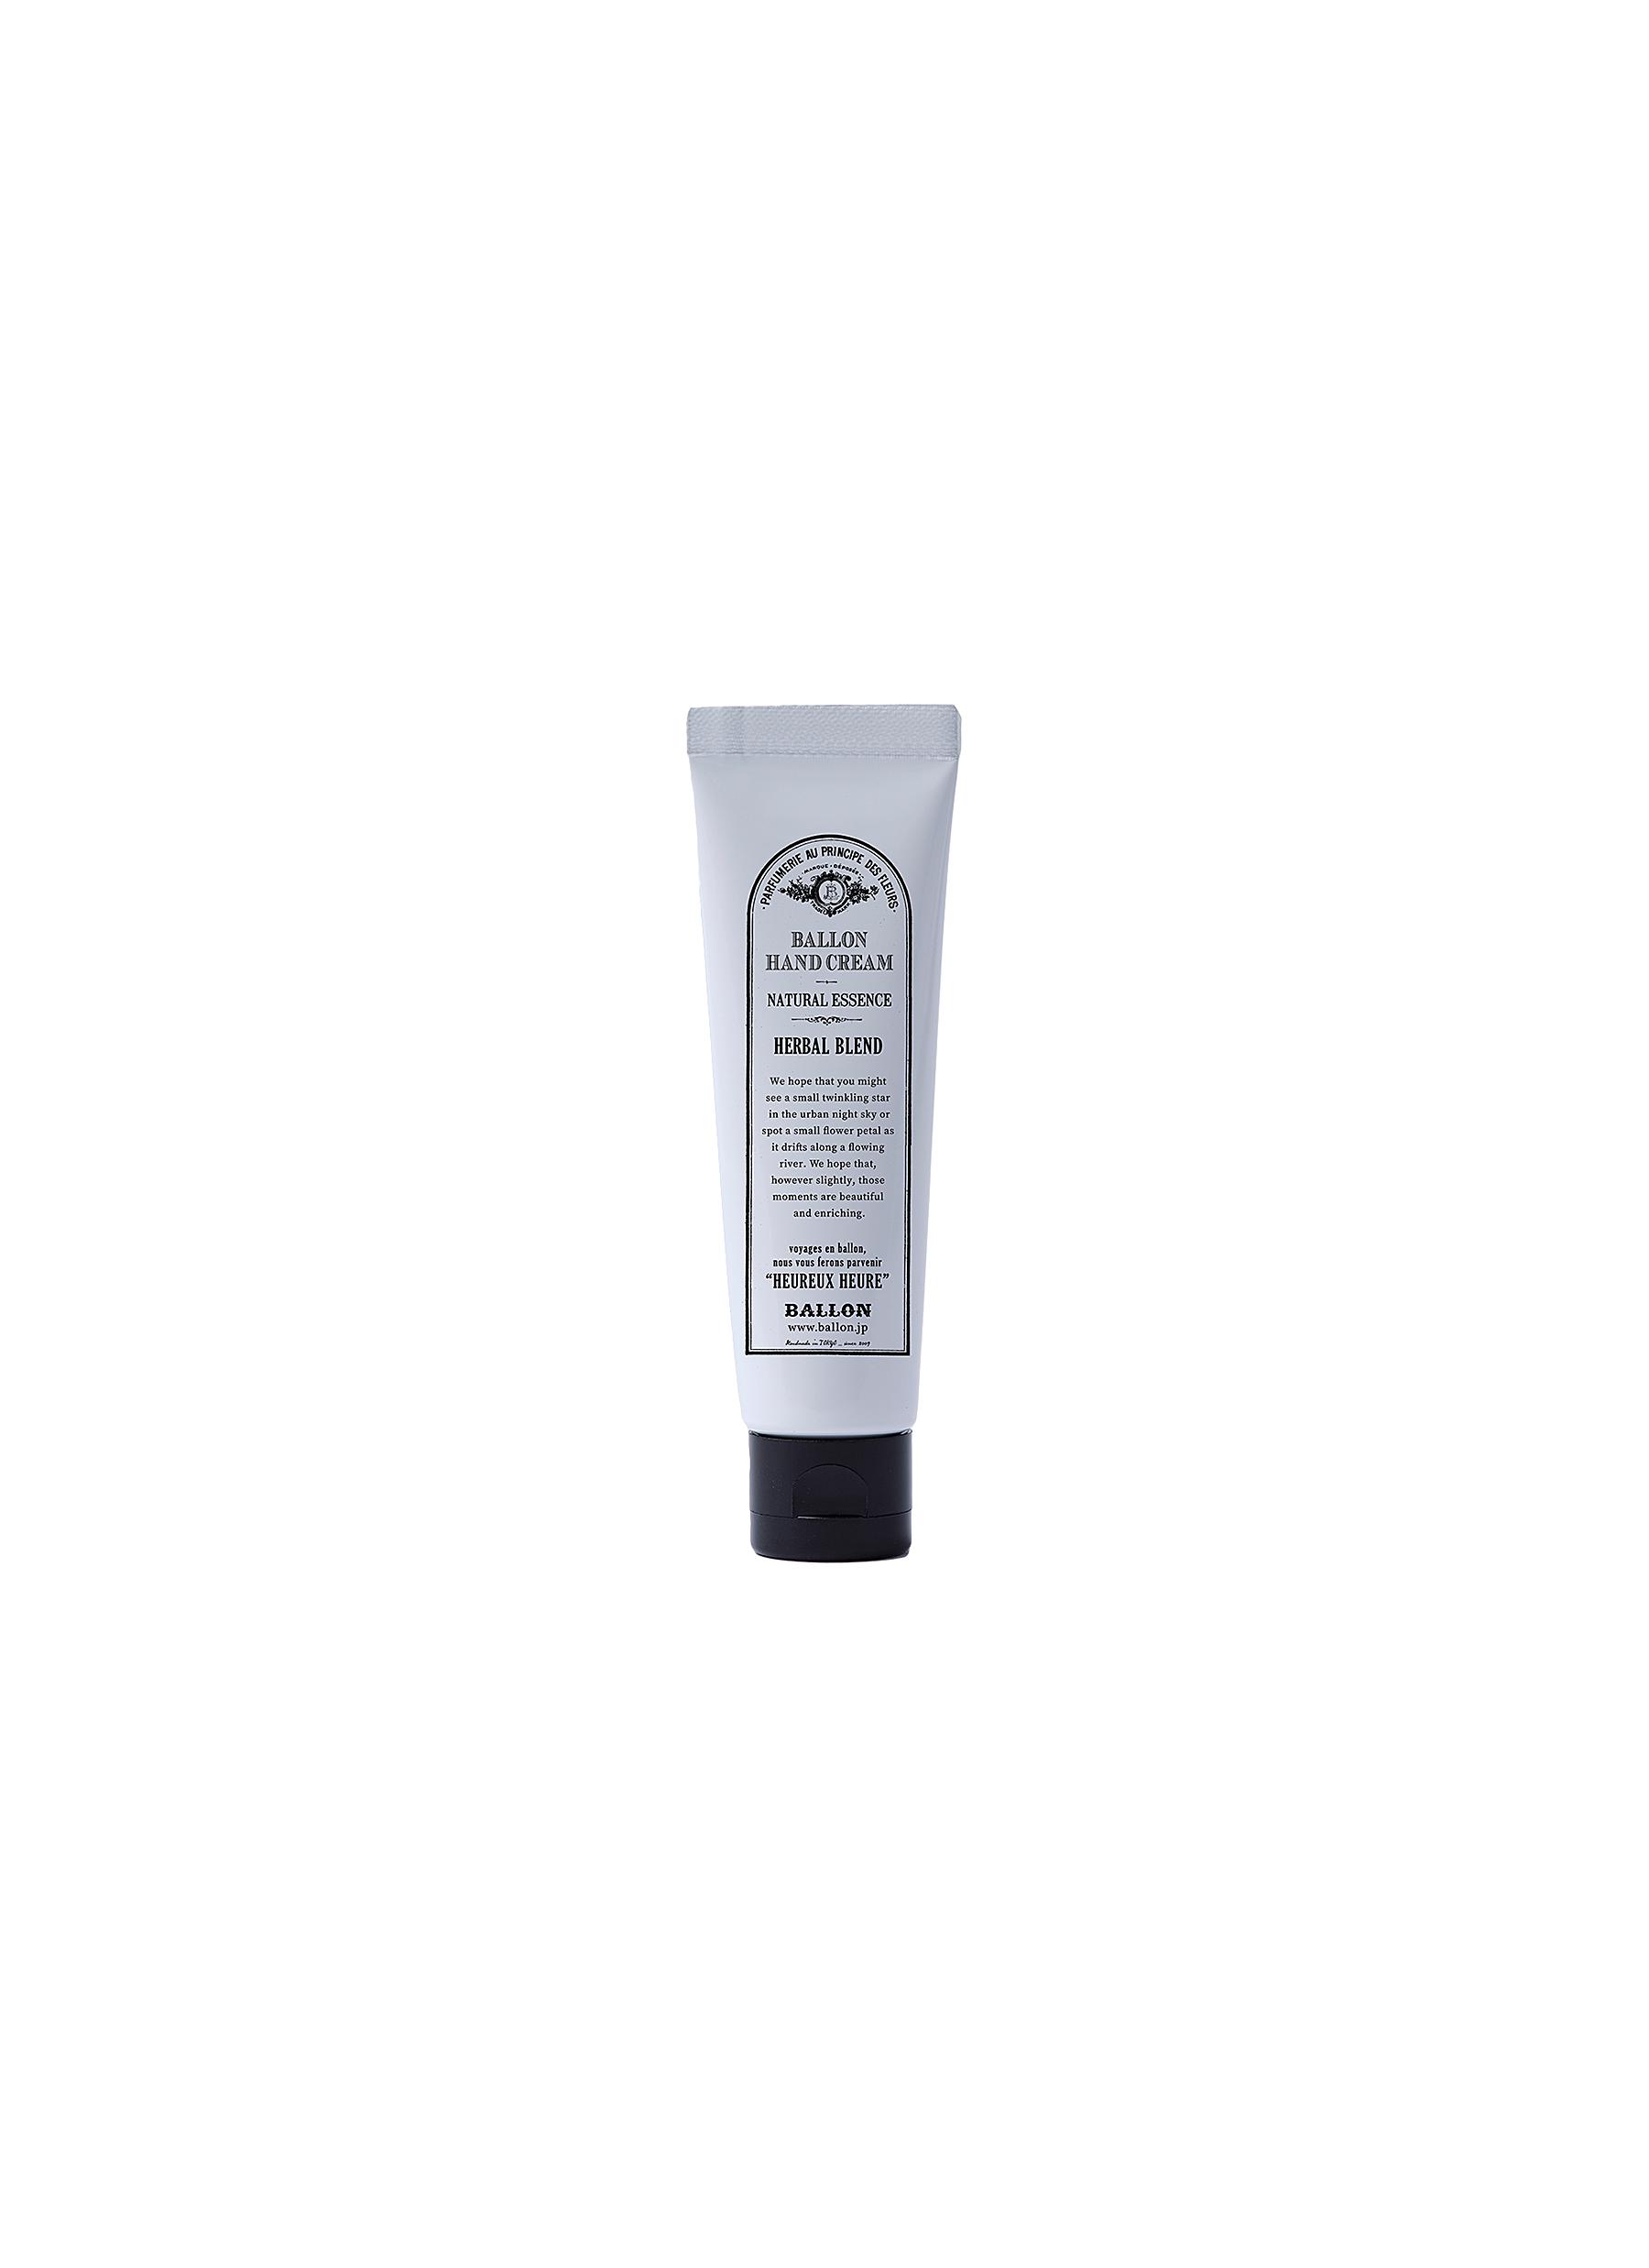 Apothecary Herbal Blend Hand Cream 25g